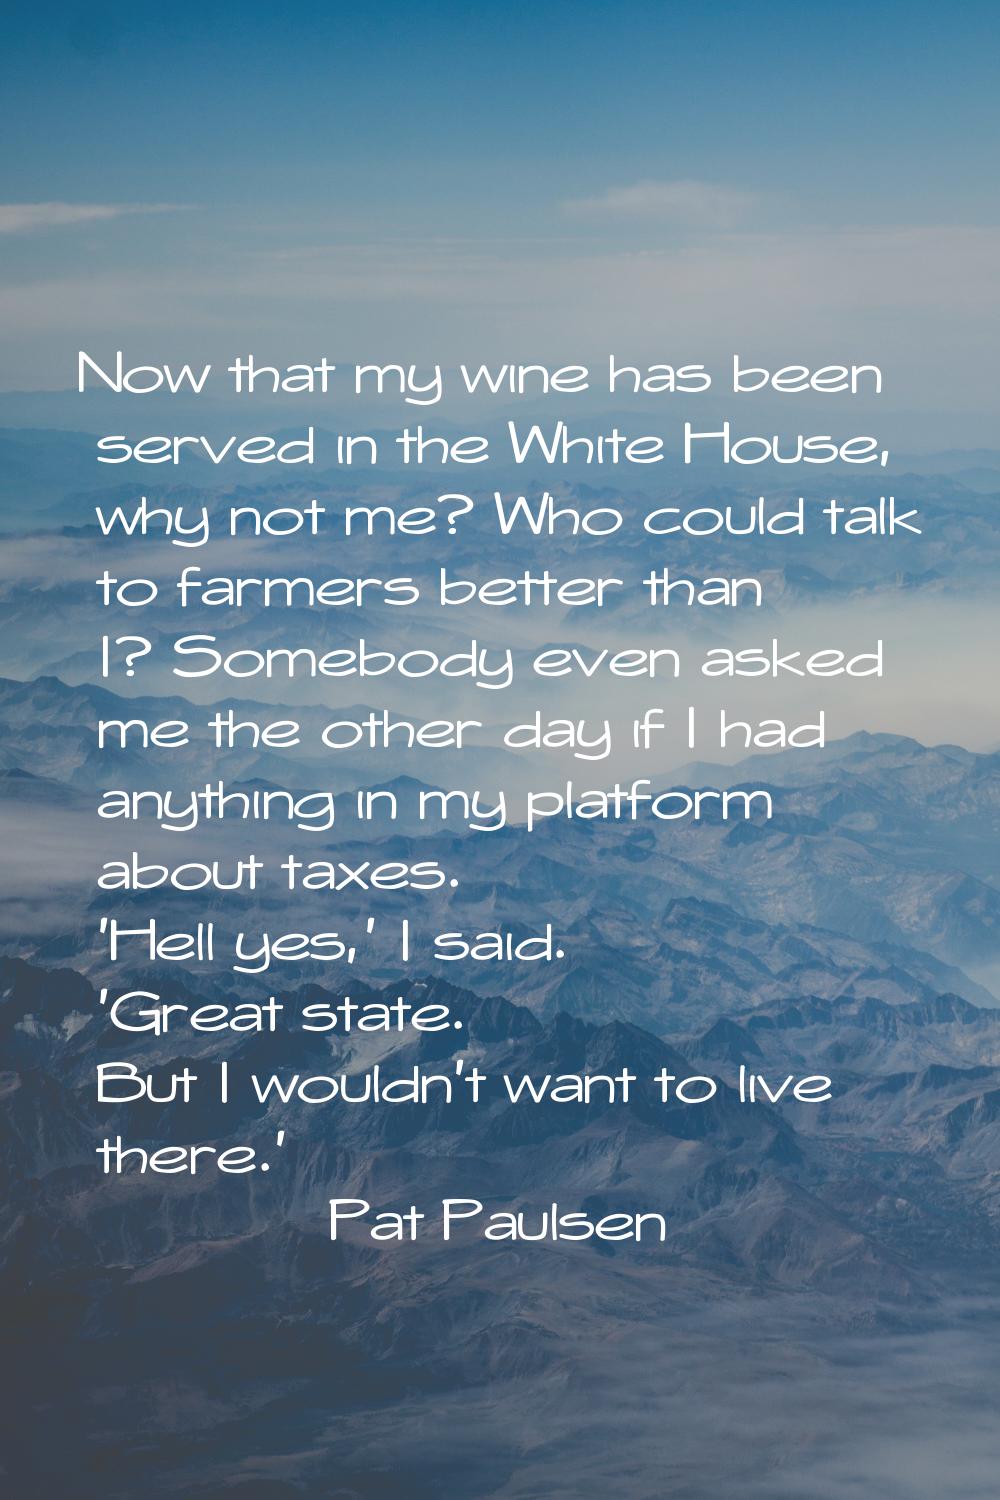 Now that my wine has been served in the White House, why not me? Who could talk to farmers better t